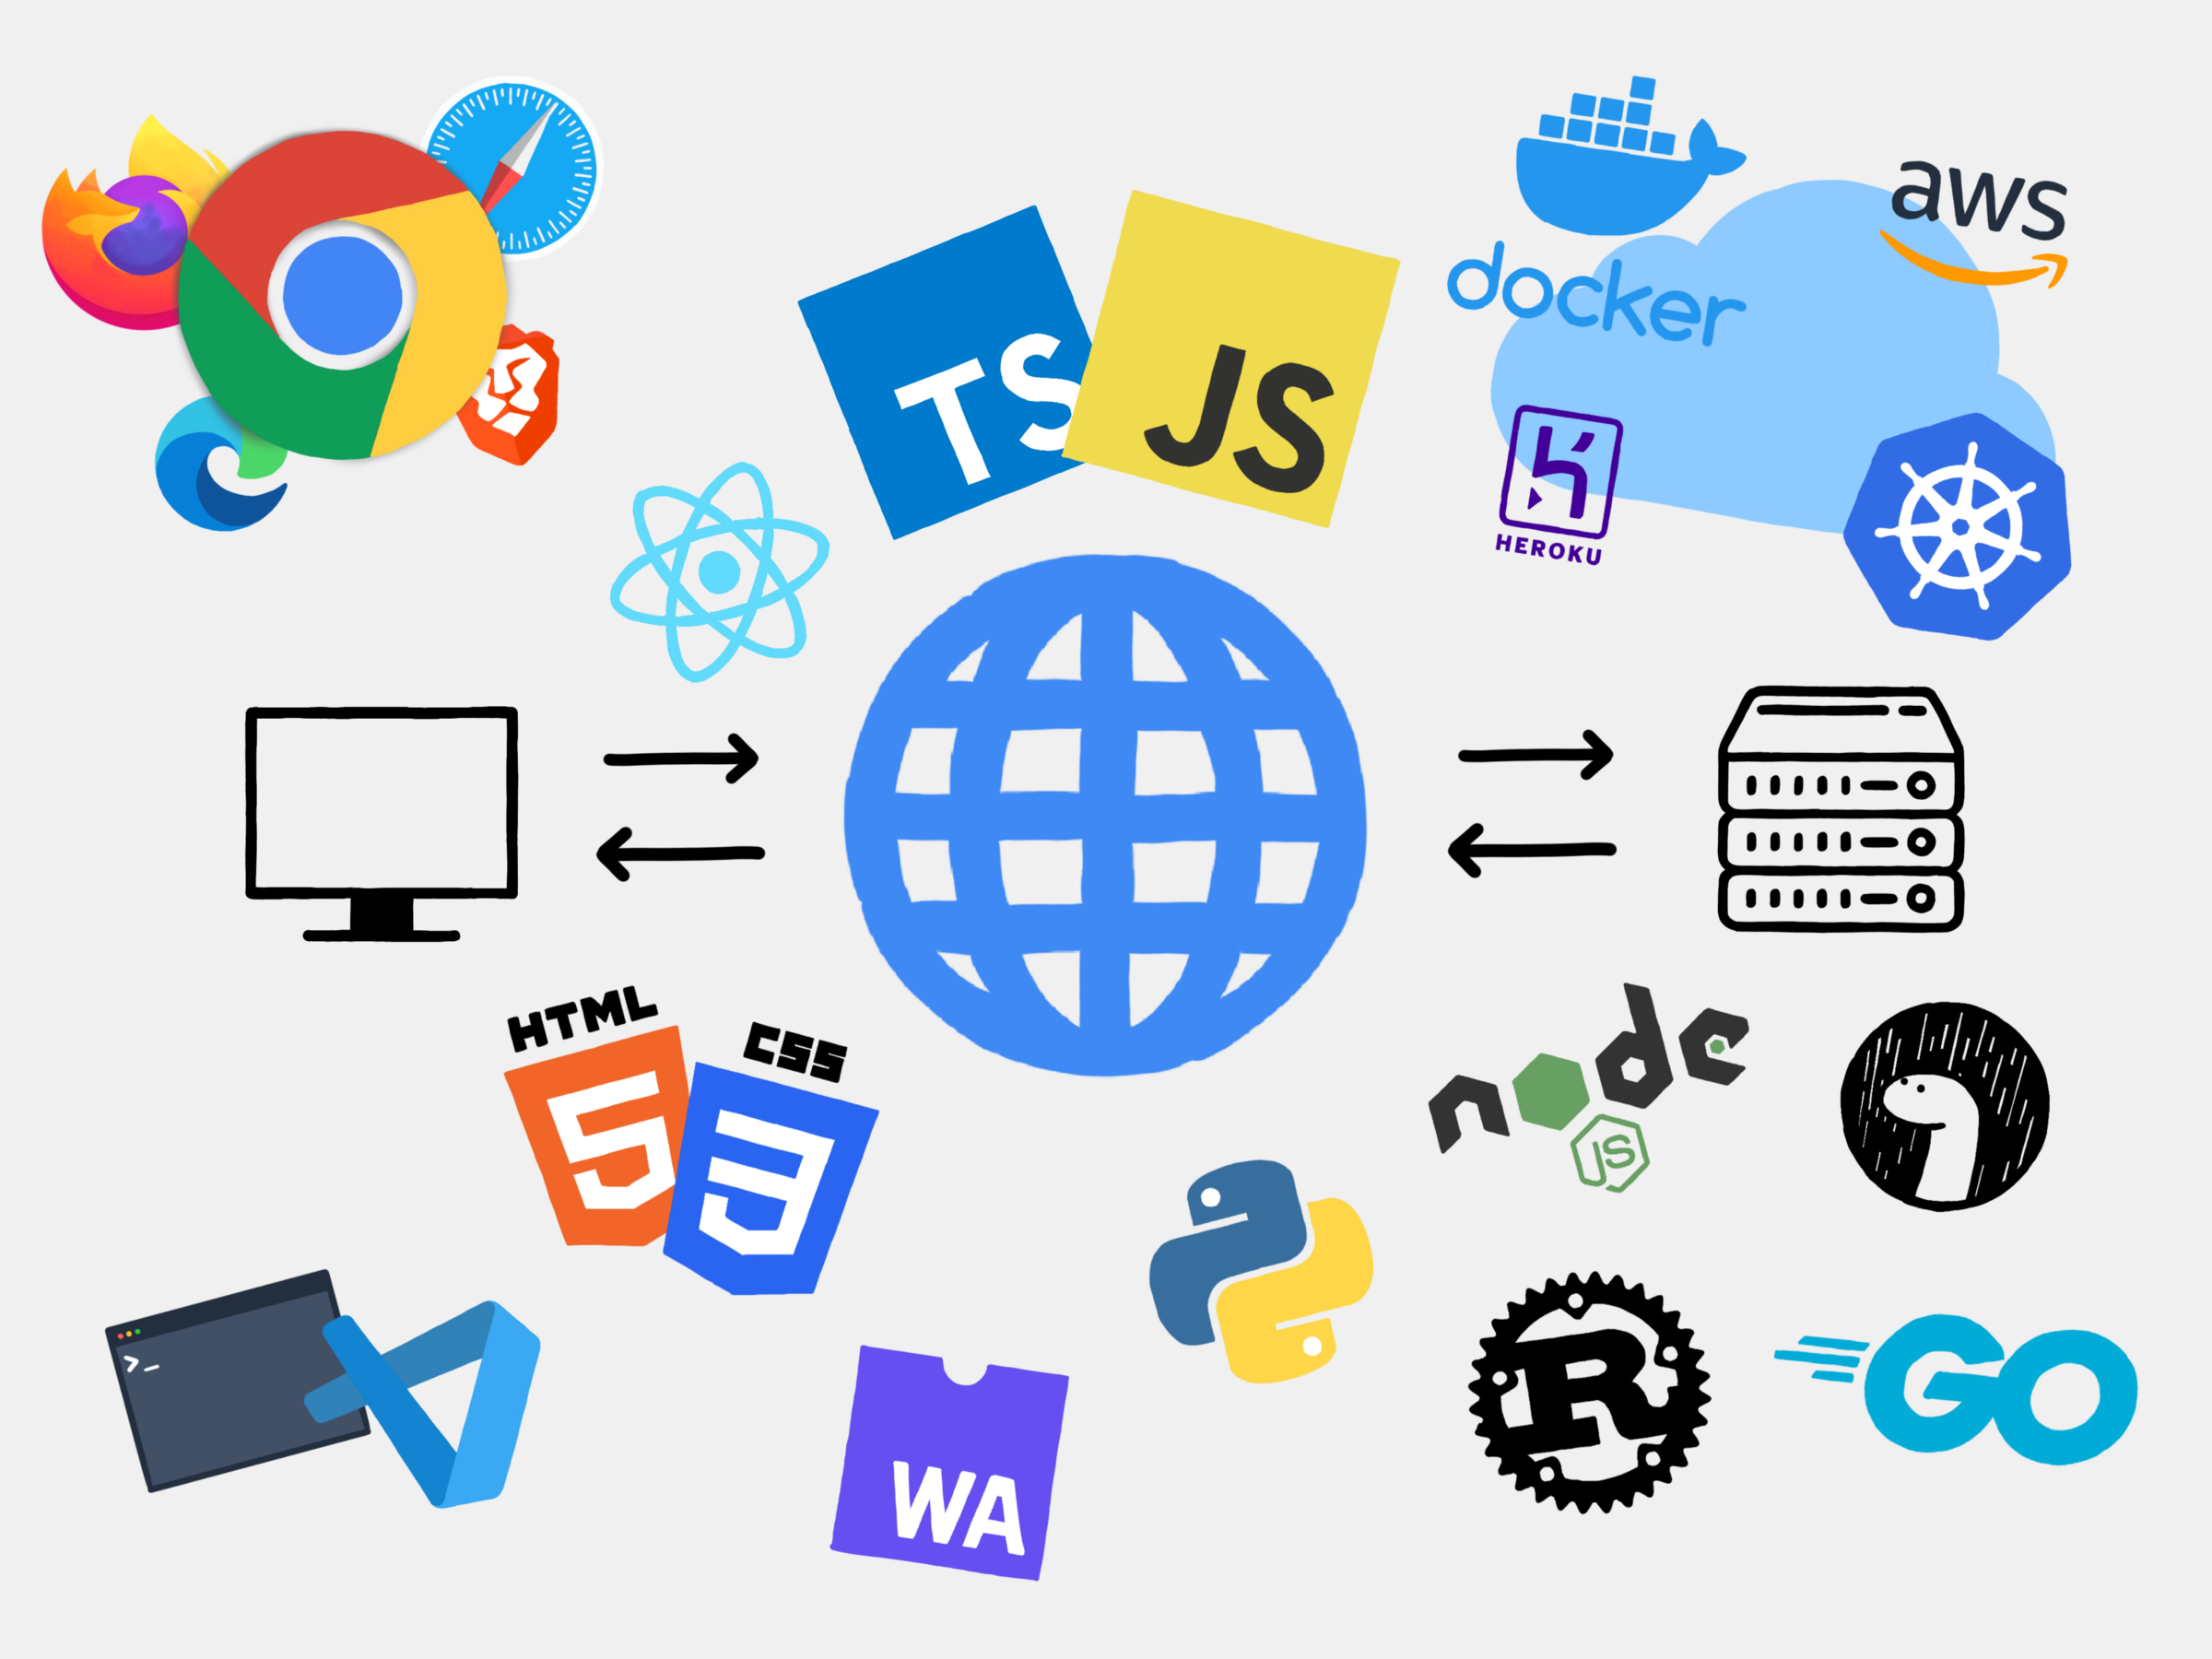 An illustration of of various icons and logos related full stack web development.